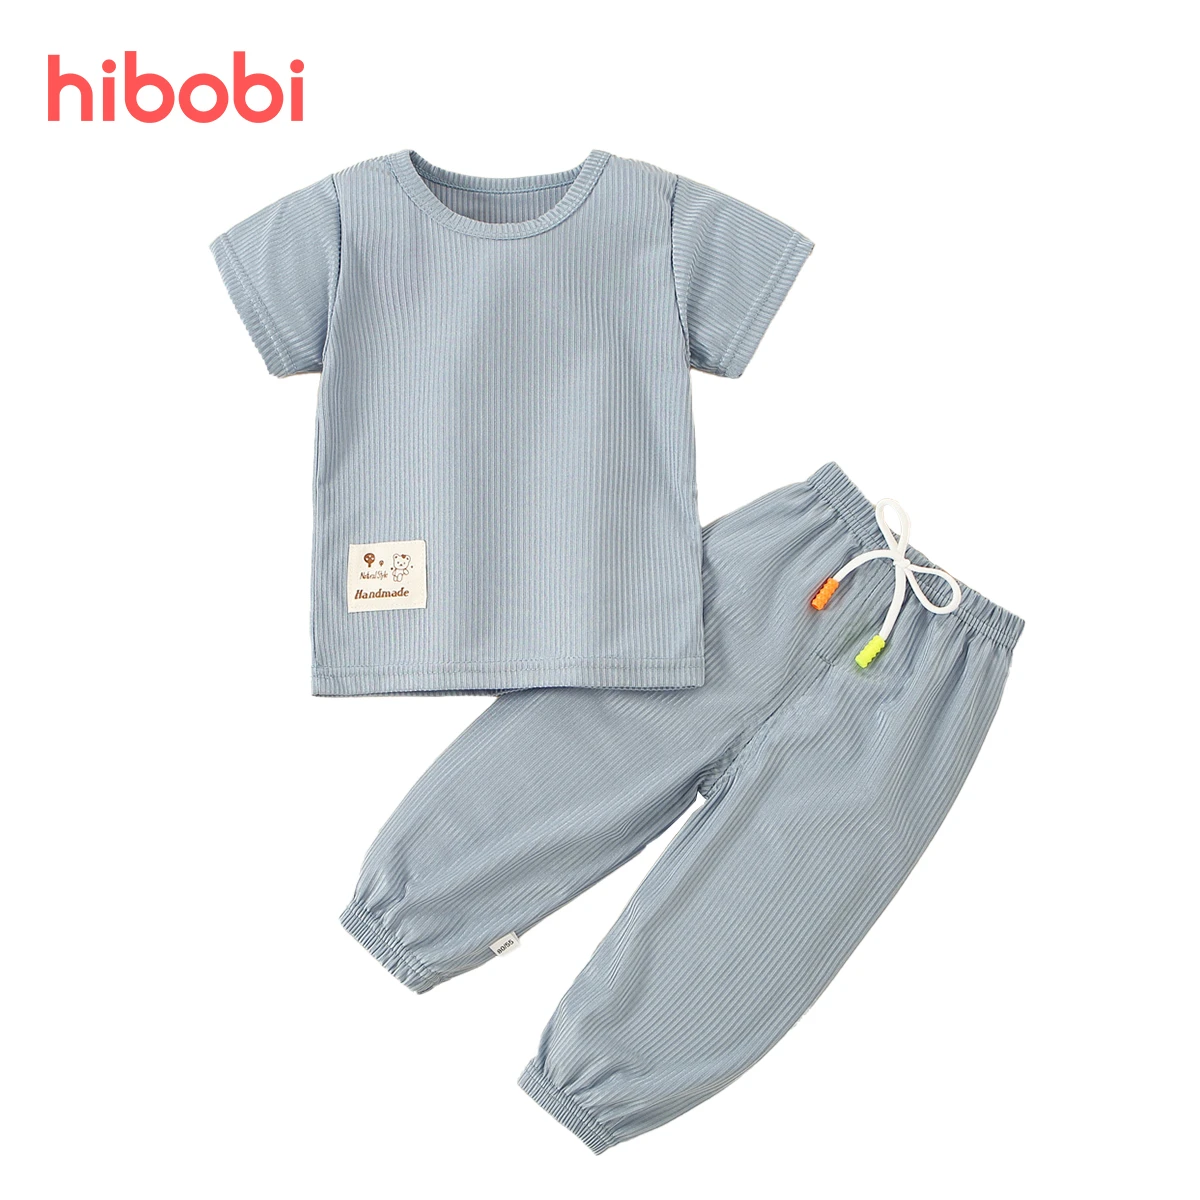 Hibobi Fashion Baby Clothes Set Summer Toddler Baby Boy Girl Casual Tops + Loose Trouser 2pcs Newborn Baby Boy Clothing Outfits baby essentials clothing sets